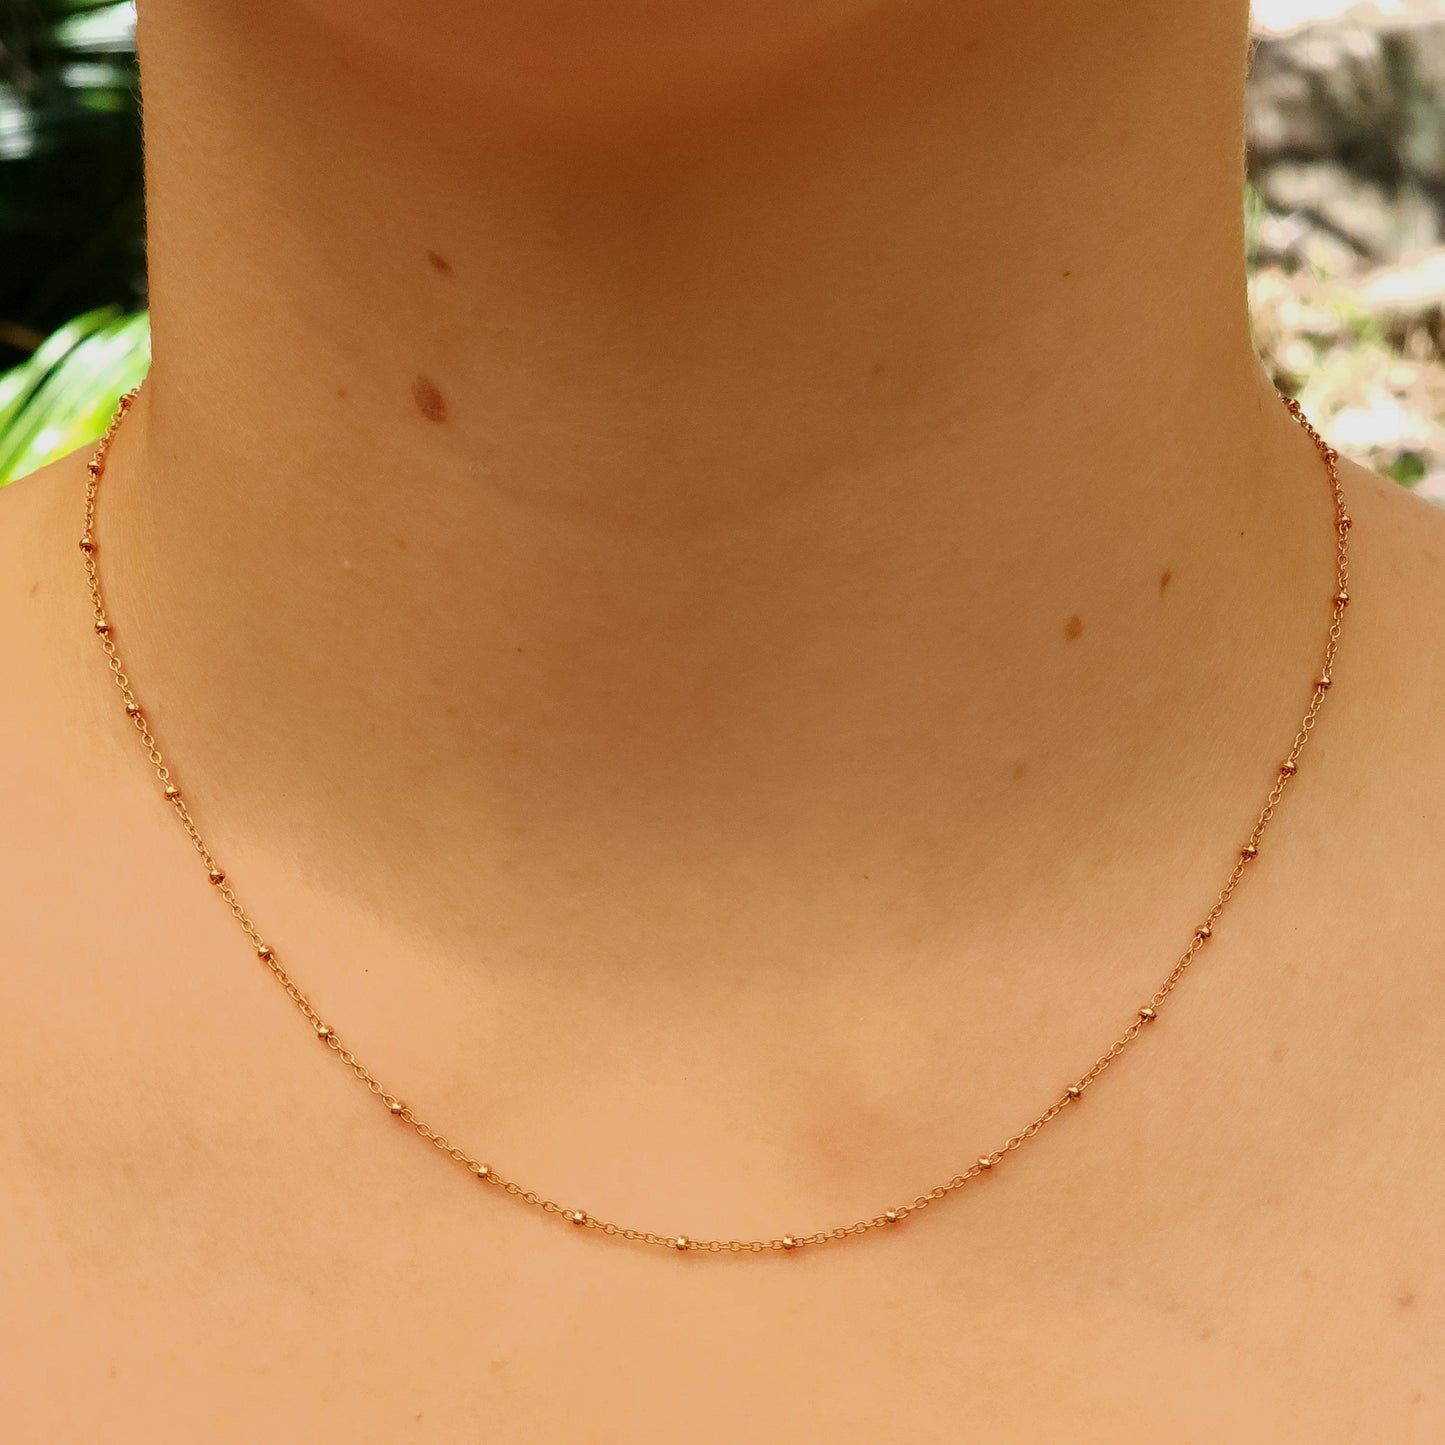 Rose gold plated silver chain with small beads